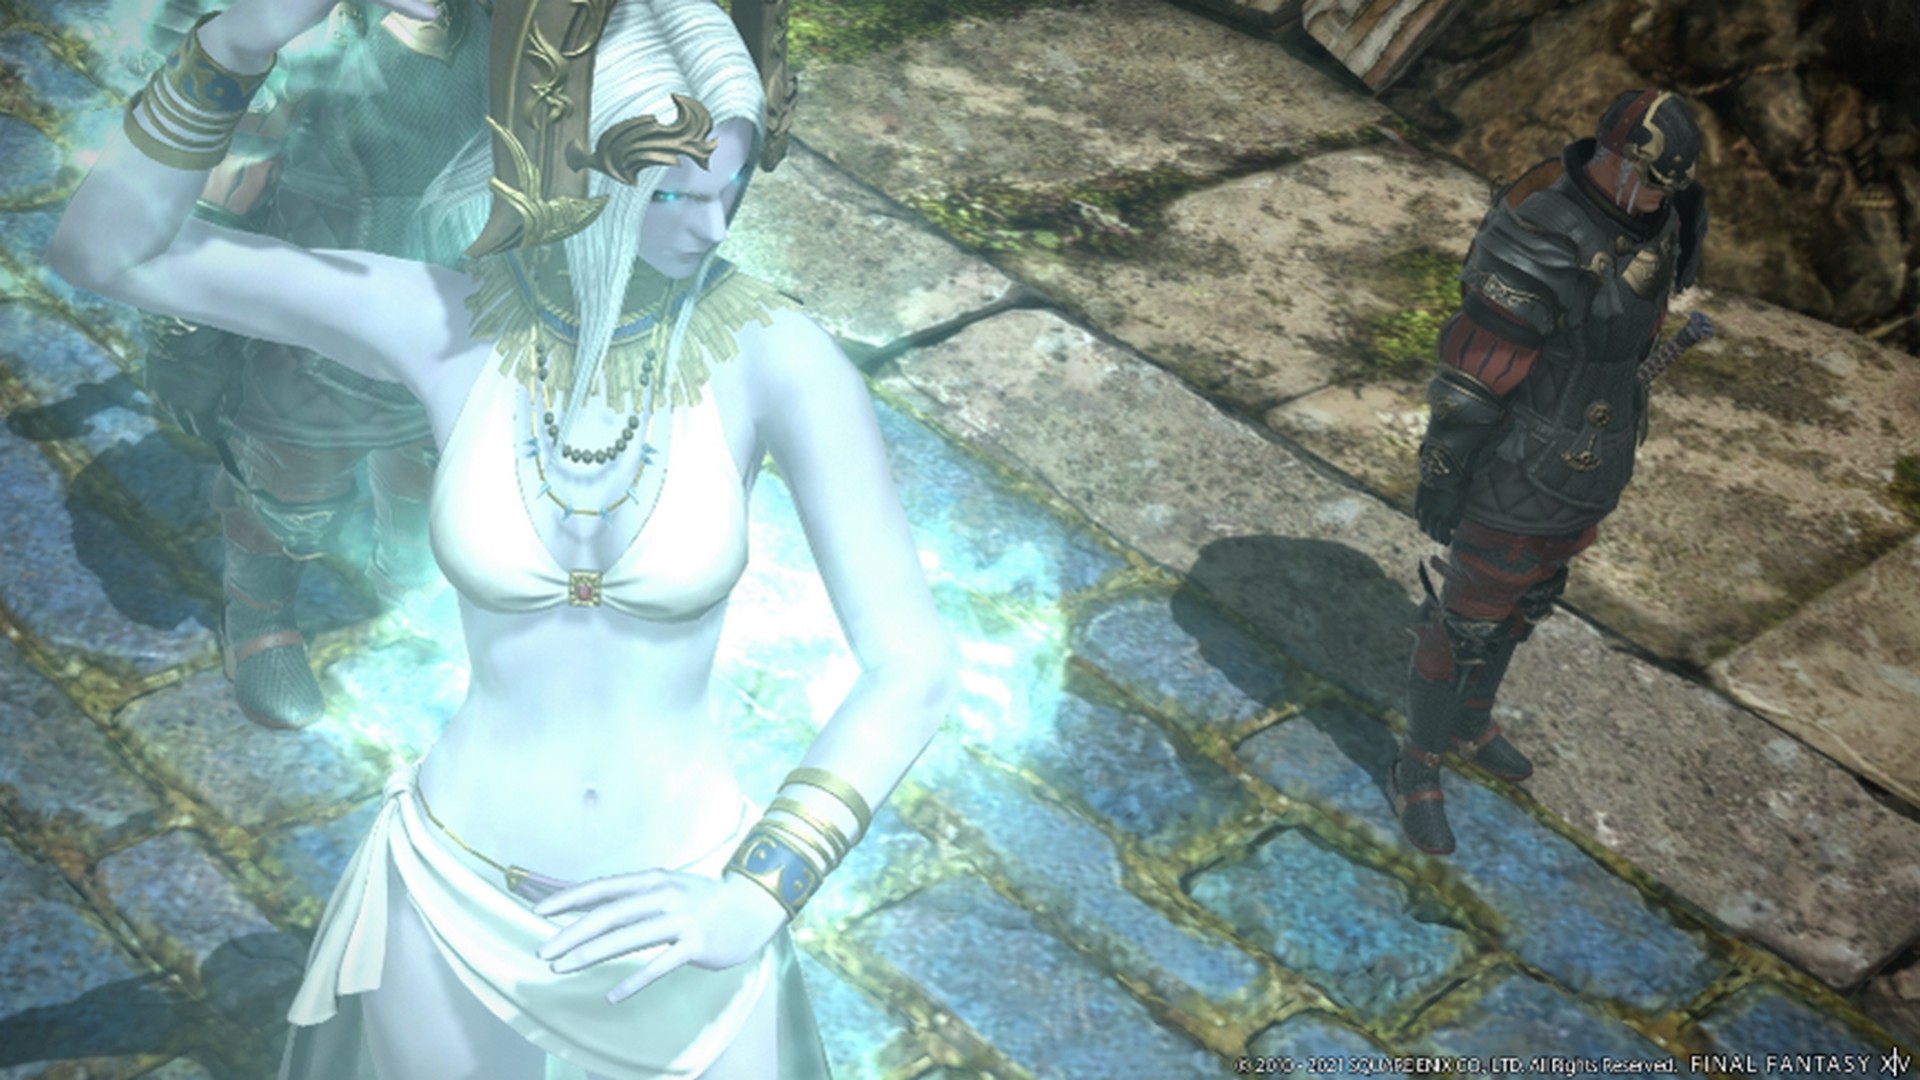 Lay The Queen’s Legacy To Rest Today In Final Fantasy XIV Online Patch 5.45